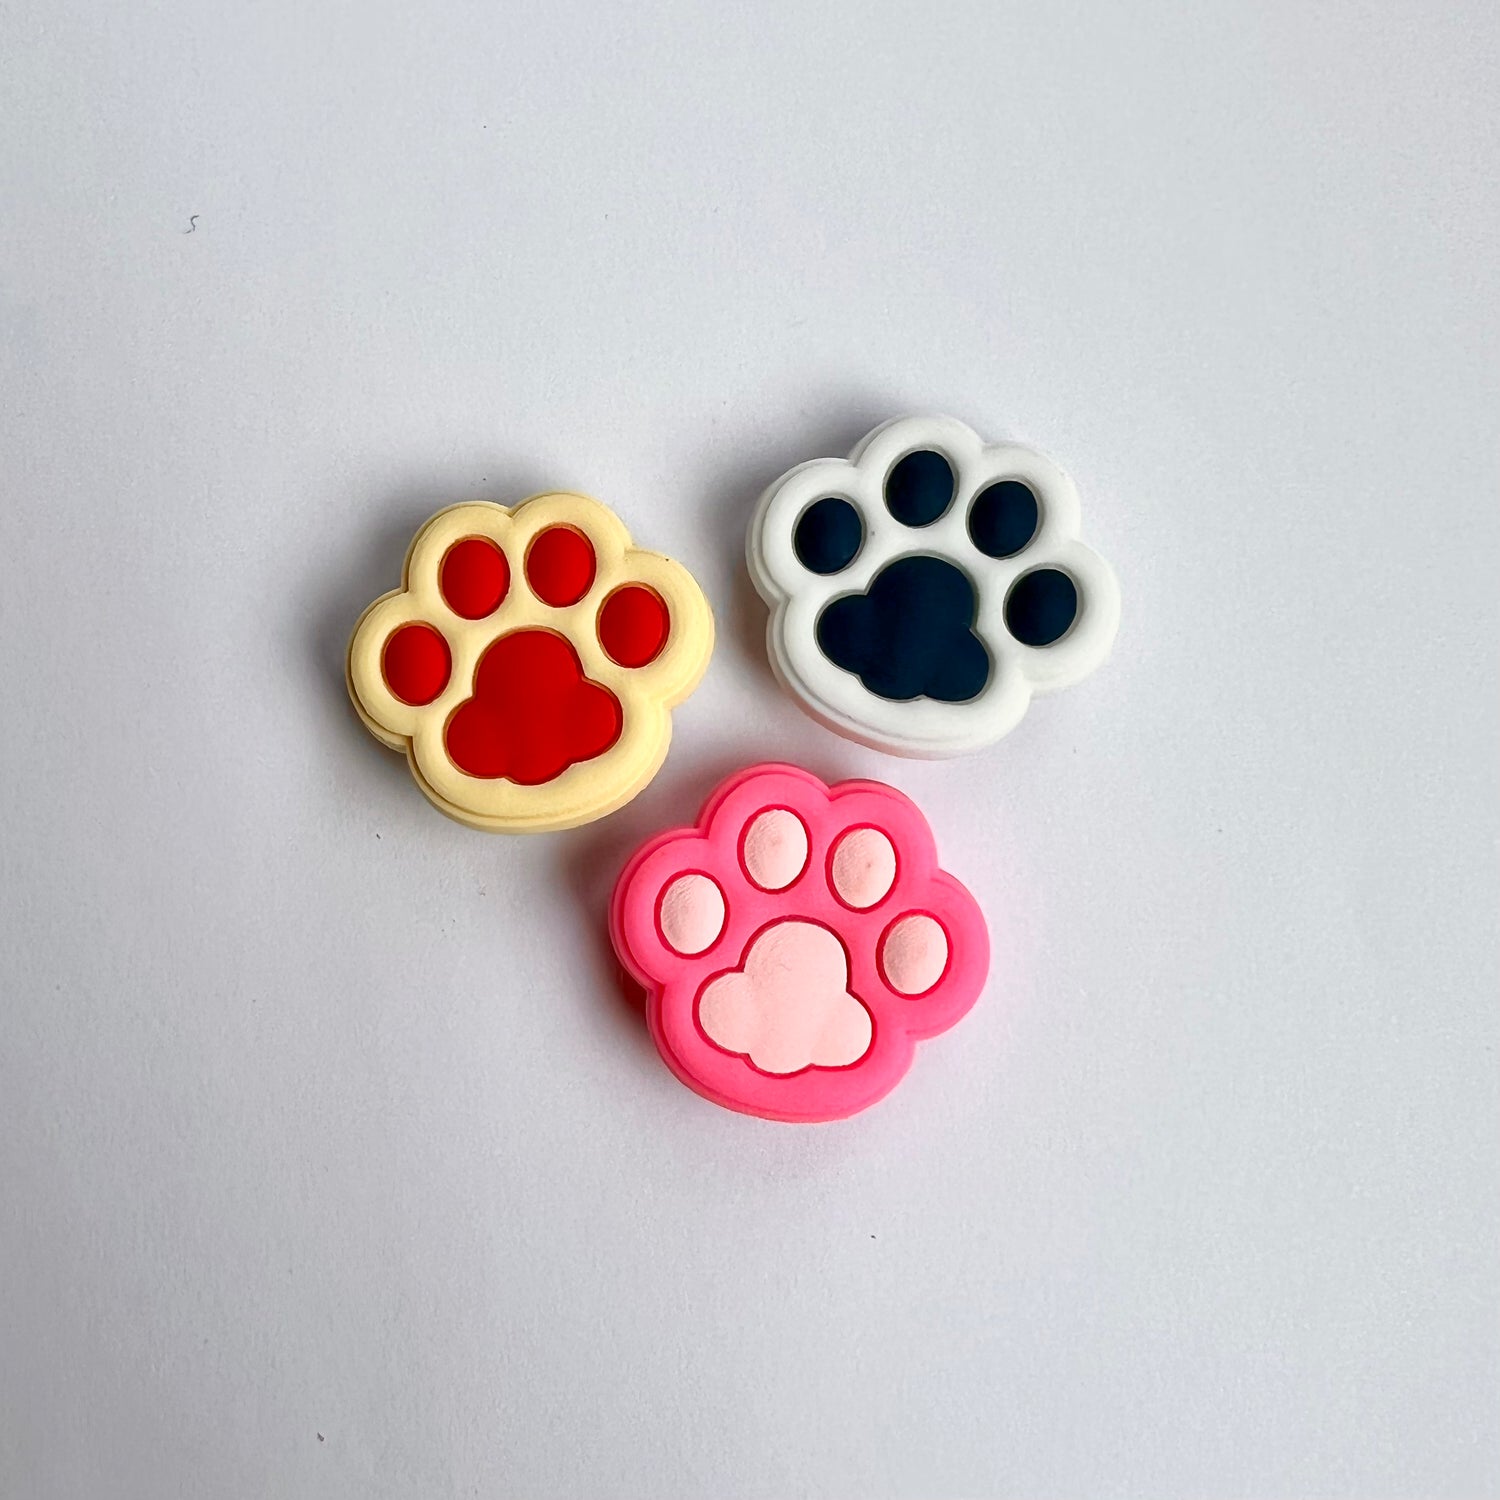 The Paw Charms Pack